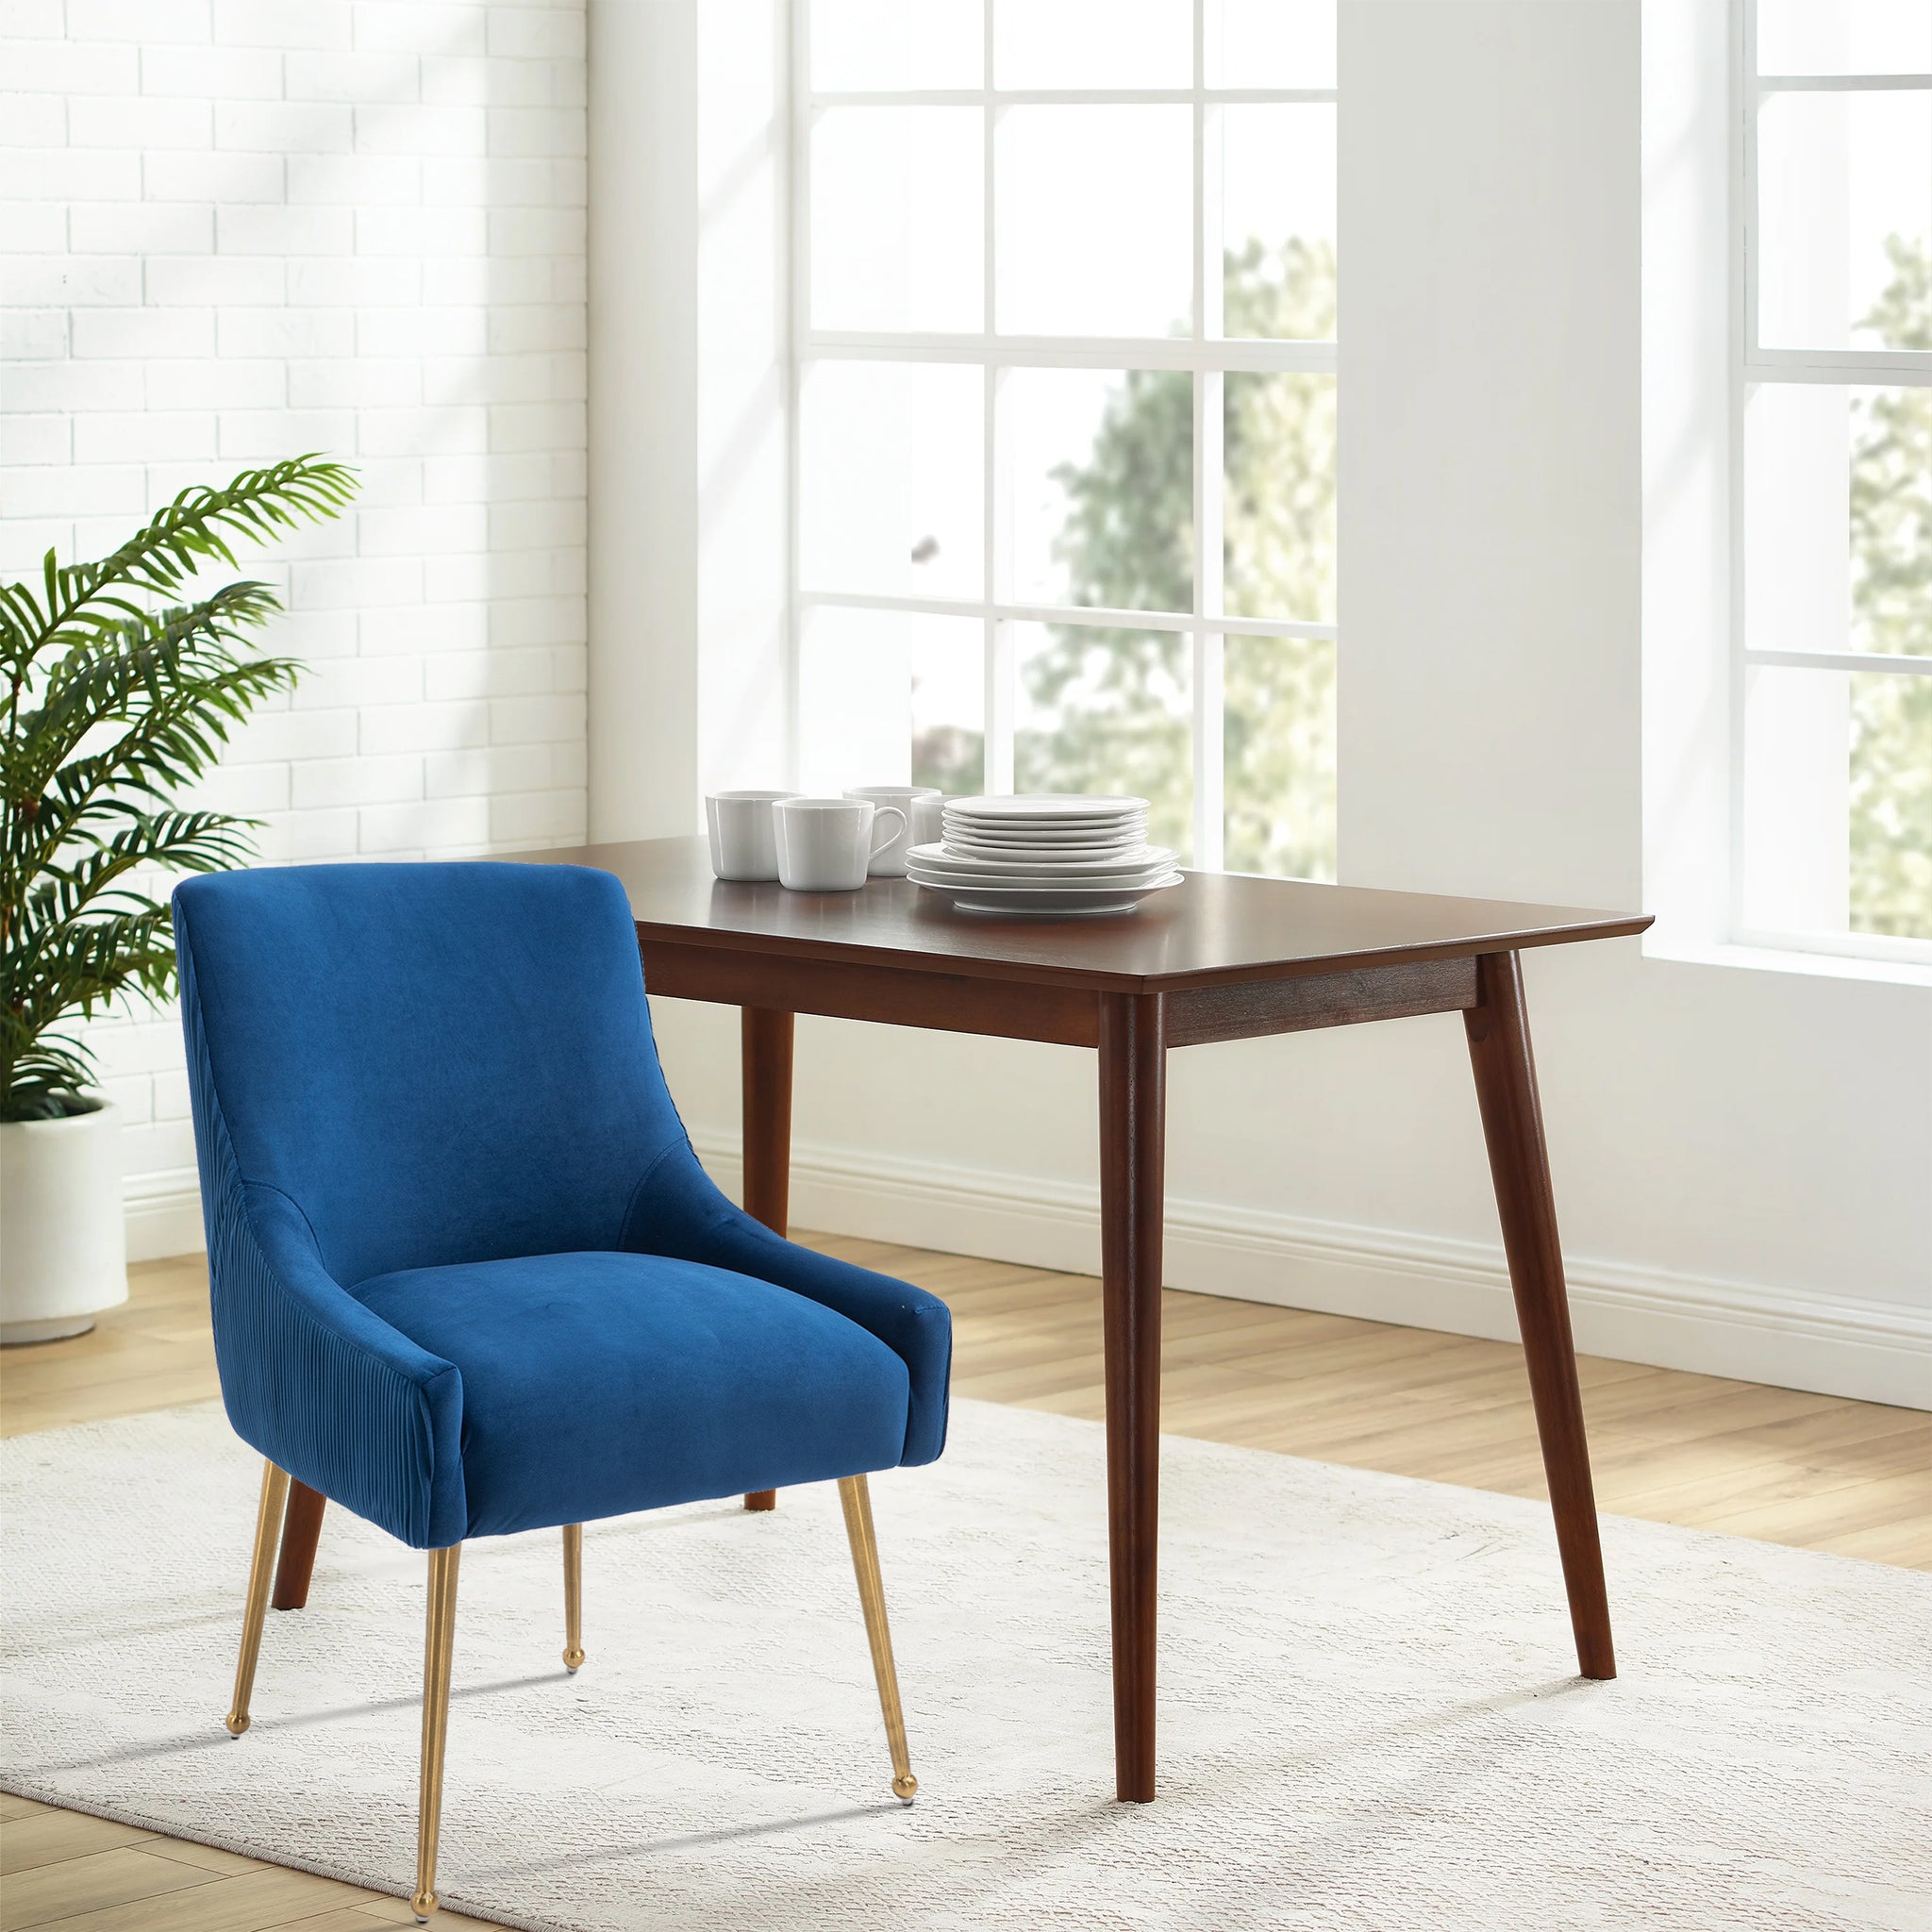 Guide to Choosing a Dining Chair